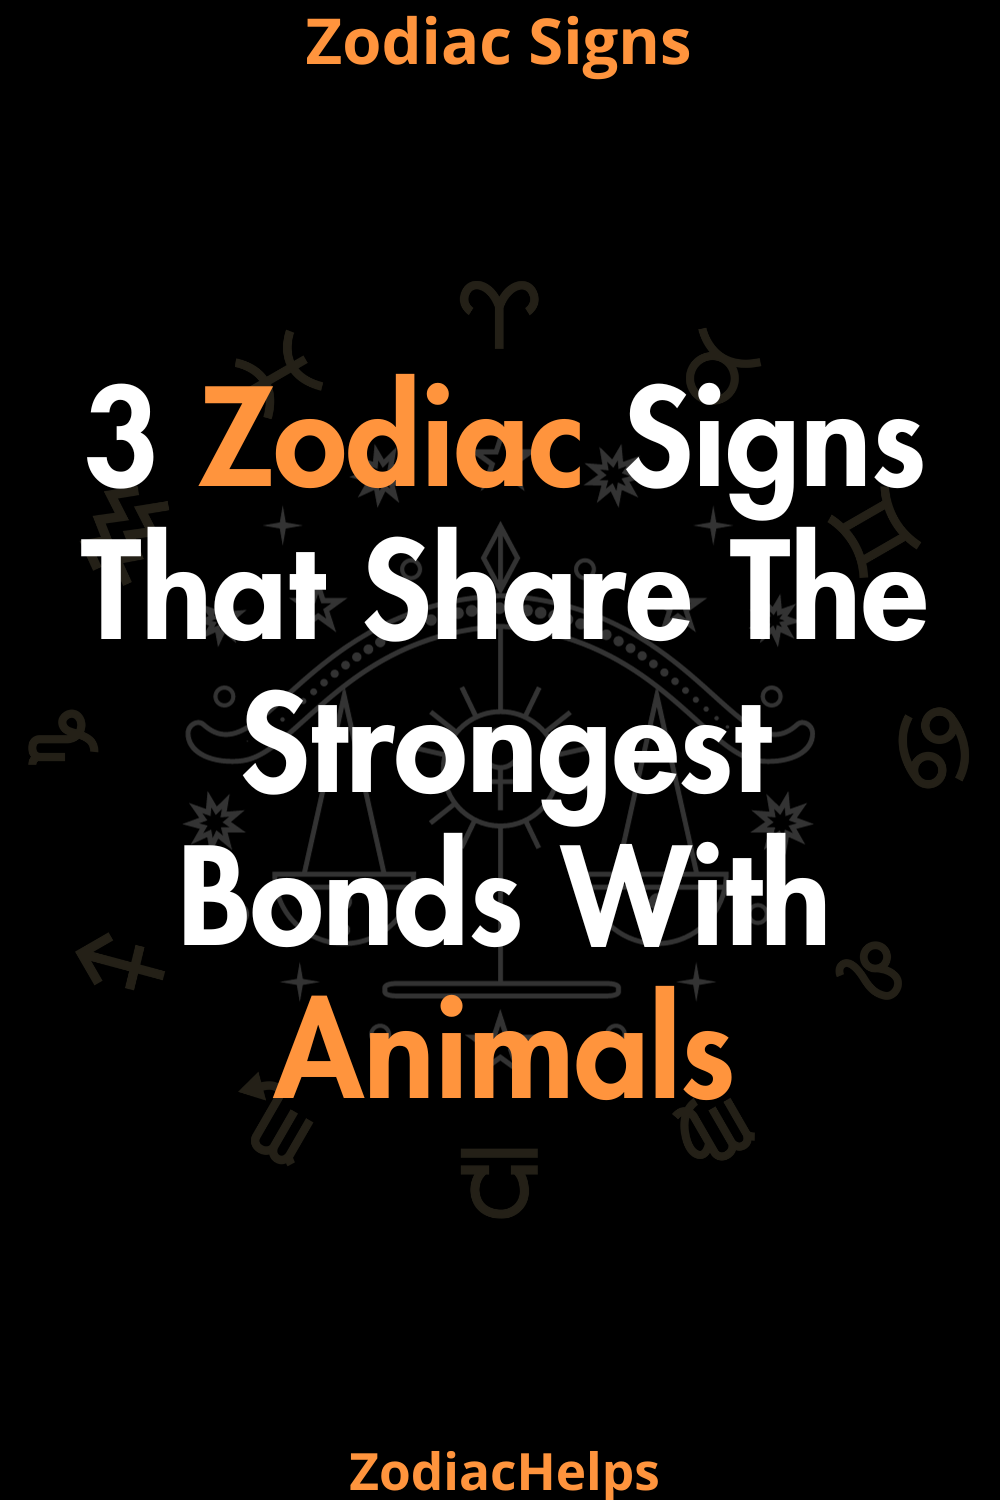 3 Zodiac Signs That Share The Strongest Bonds With Animals